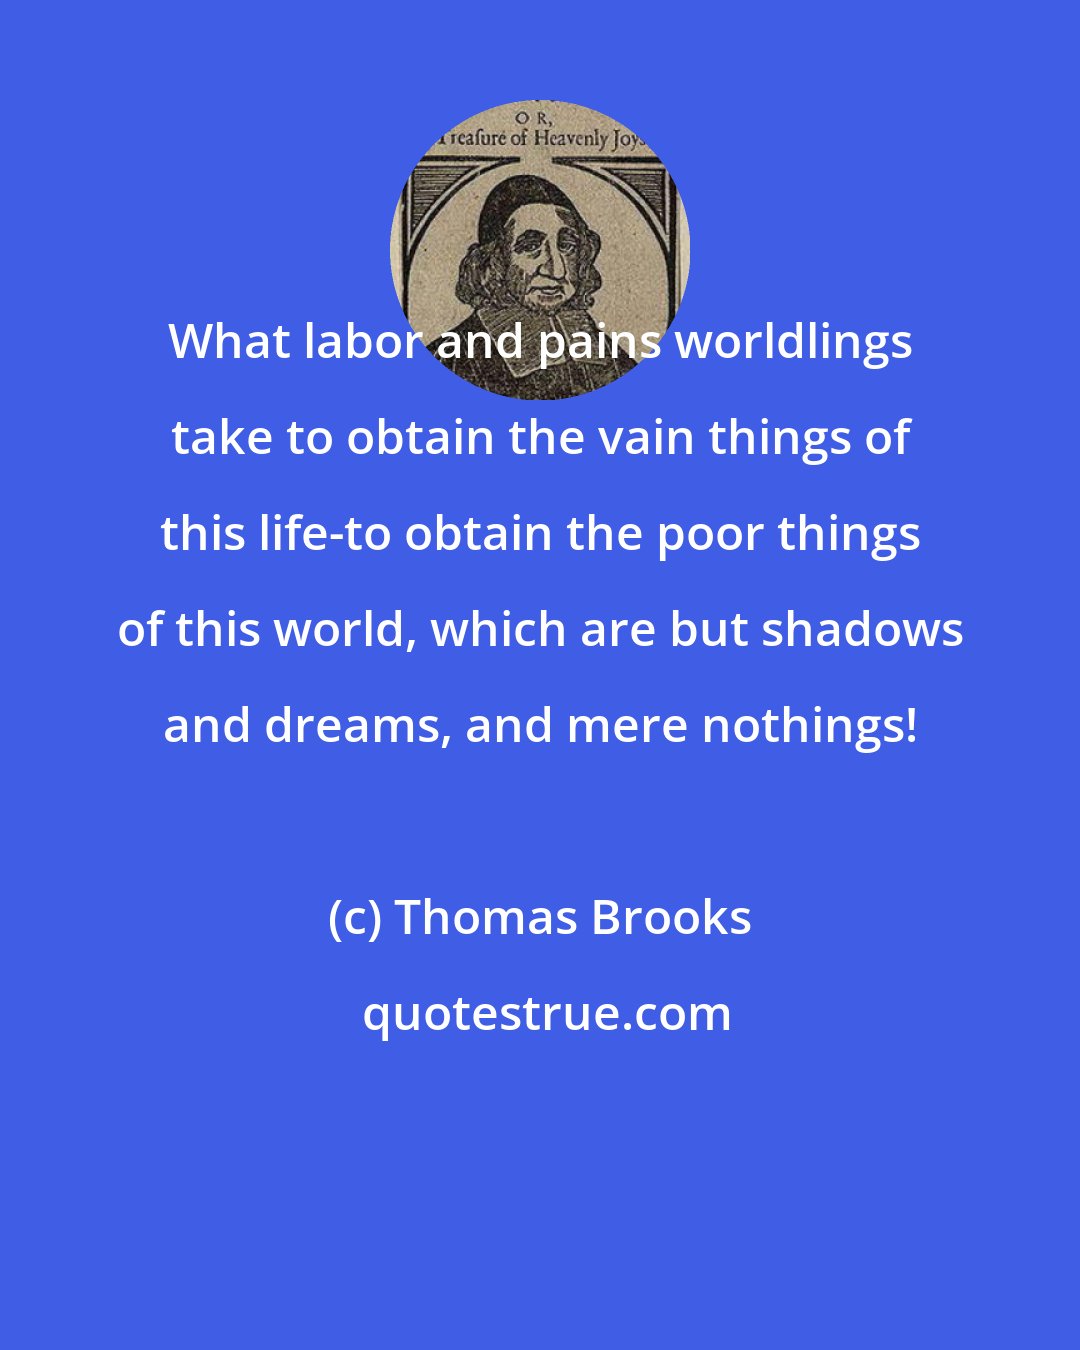 Thomas Brooks: What labor and pains worldlings take to obtain the vain things of this life-to obtain the poor things of this world, which are but shadows and dreams, and mere nothings!